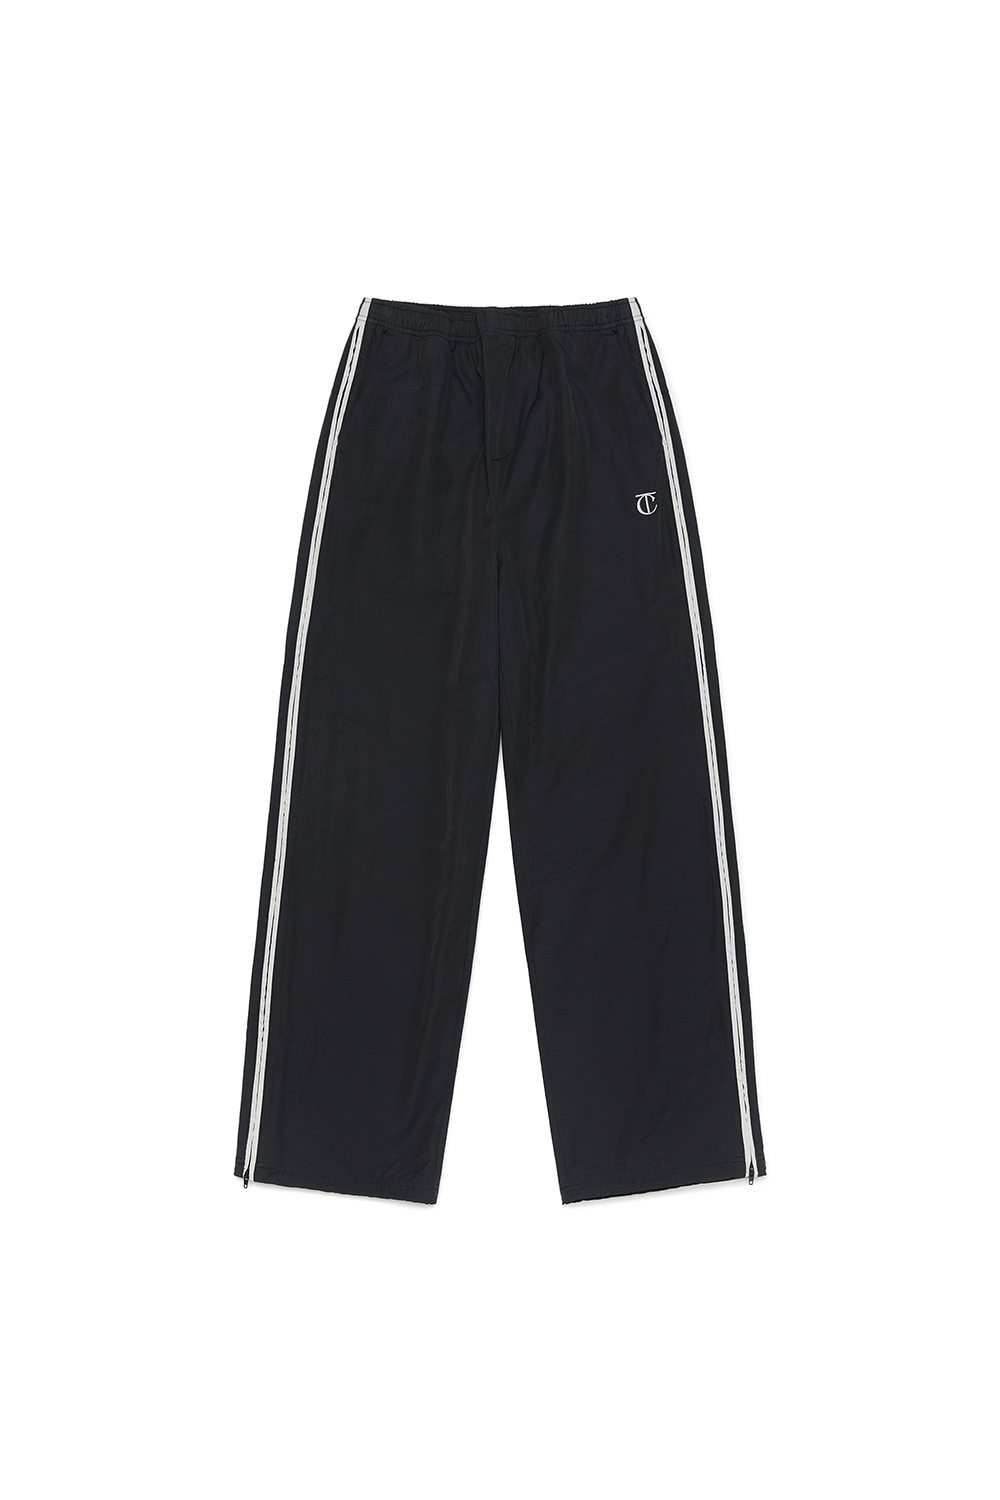 LOW RISE TRACK PANTS [NAVY]		